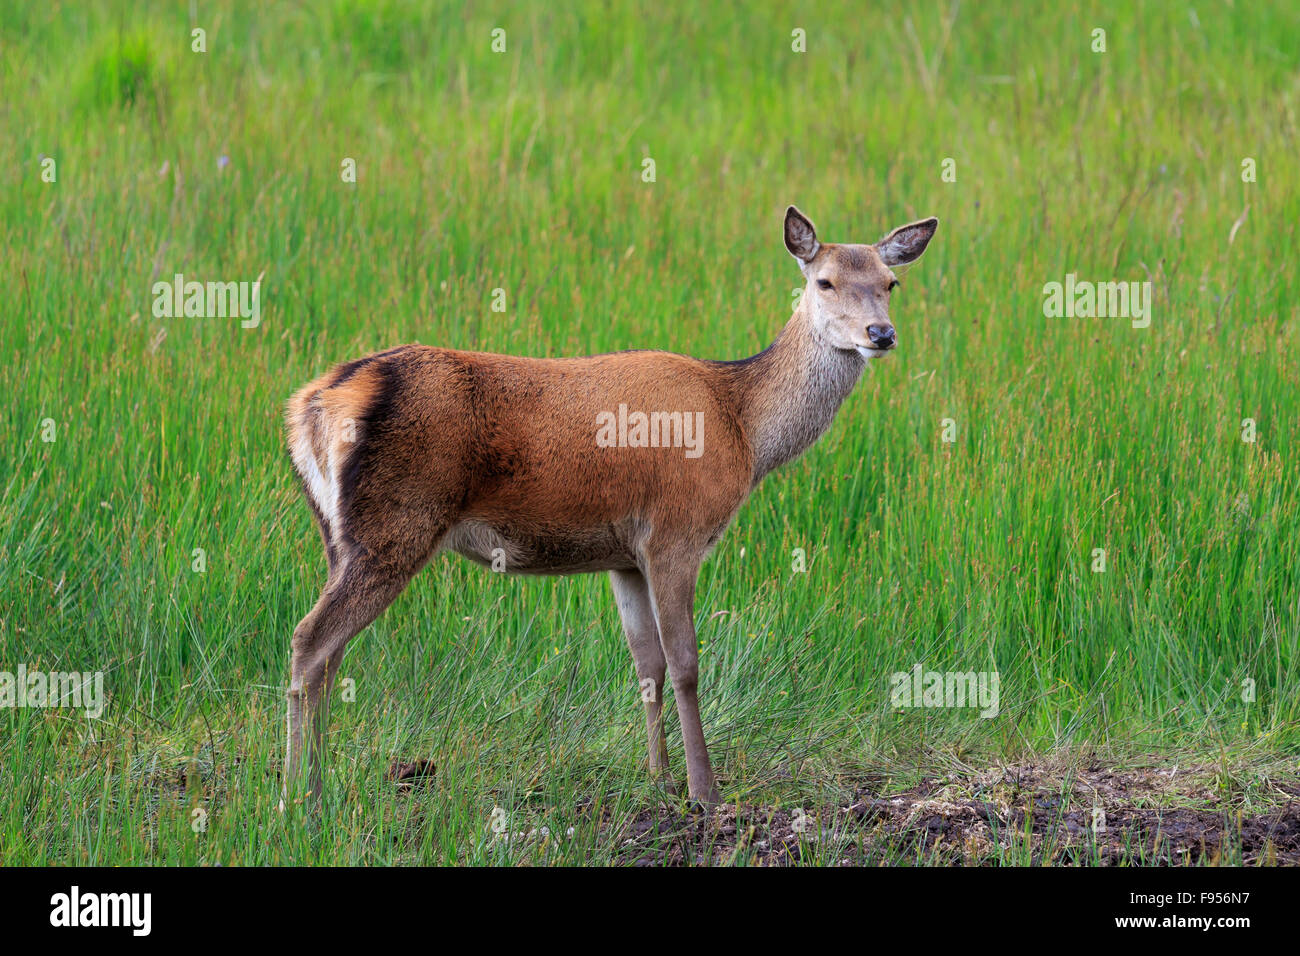 Lone Hind Red Deer standing in long grass in the Scottish Highlands Stock Photo